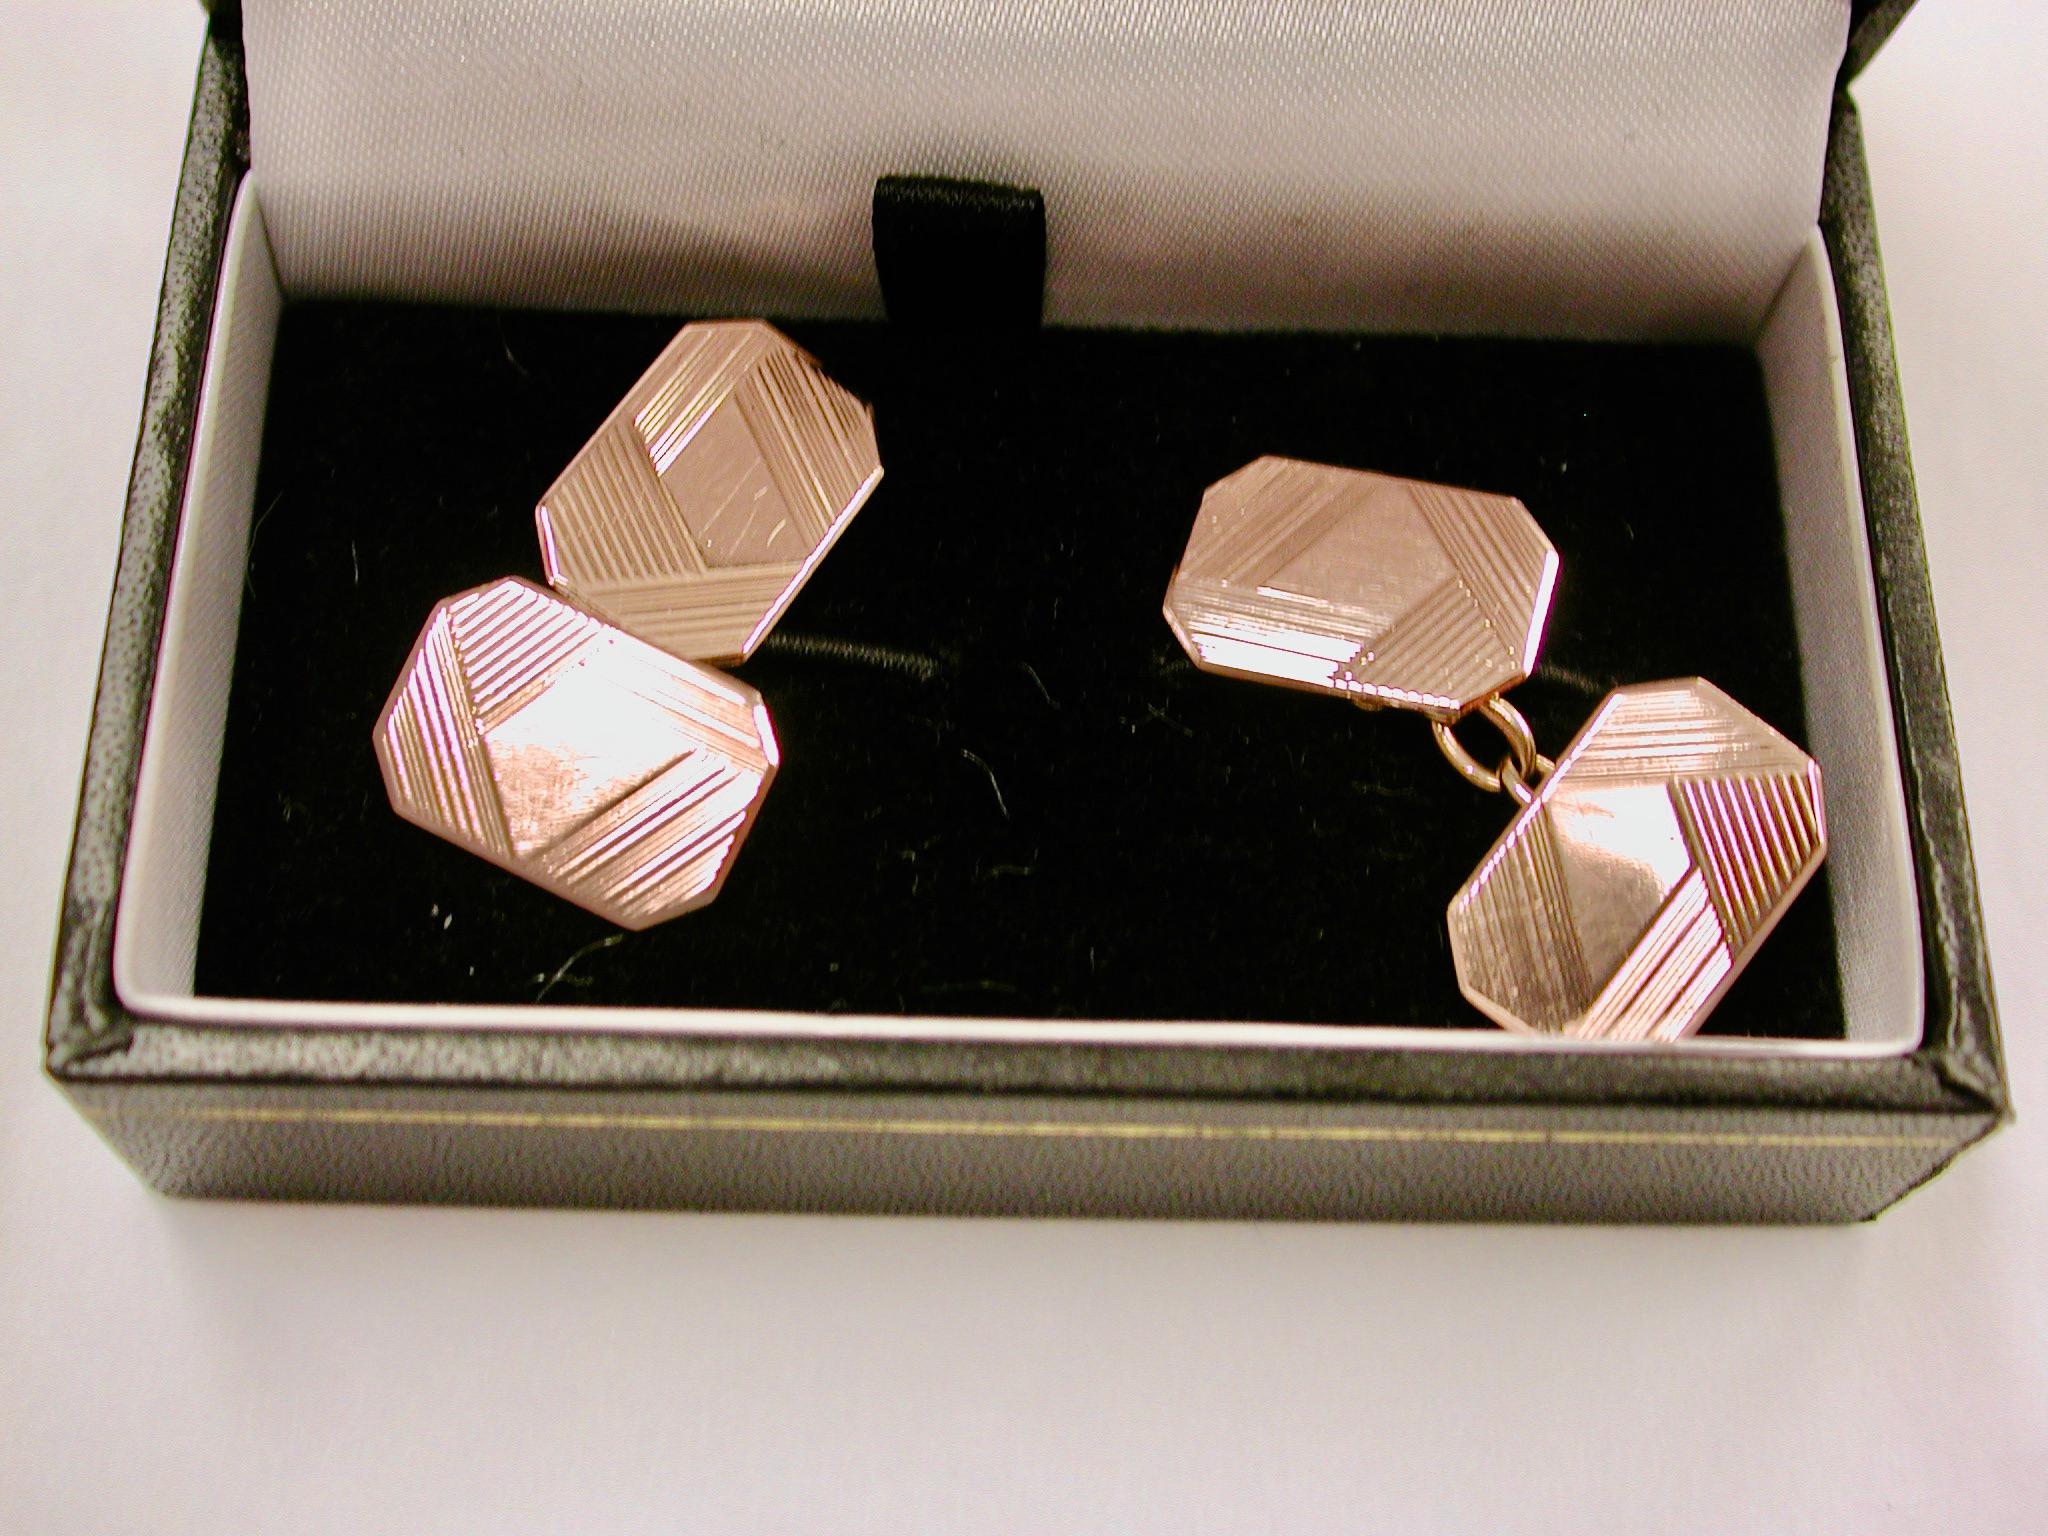 Pair Of 9ct Rose Gold Art Deco Cufflinks,Dated 1929,Birmingham
Made by H Huntley and Sons in alovely art deco formation of engine turning.
